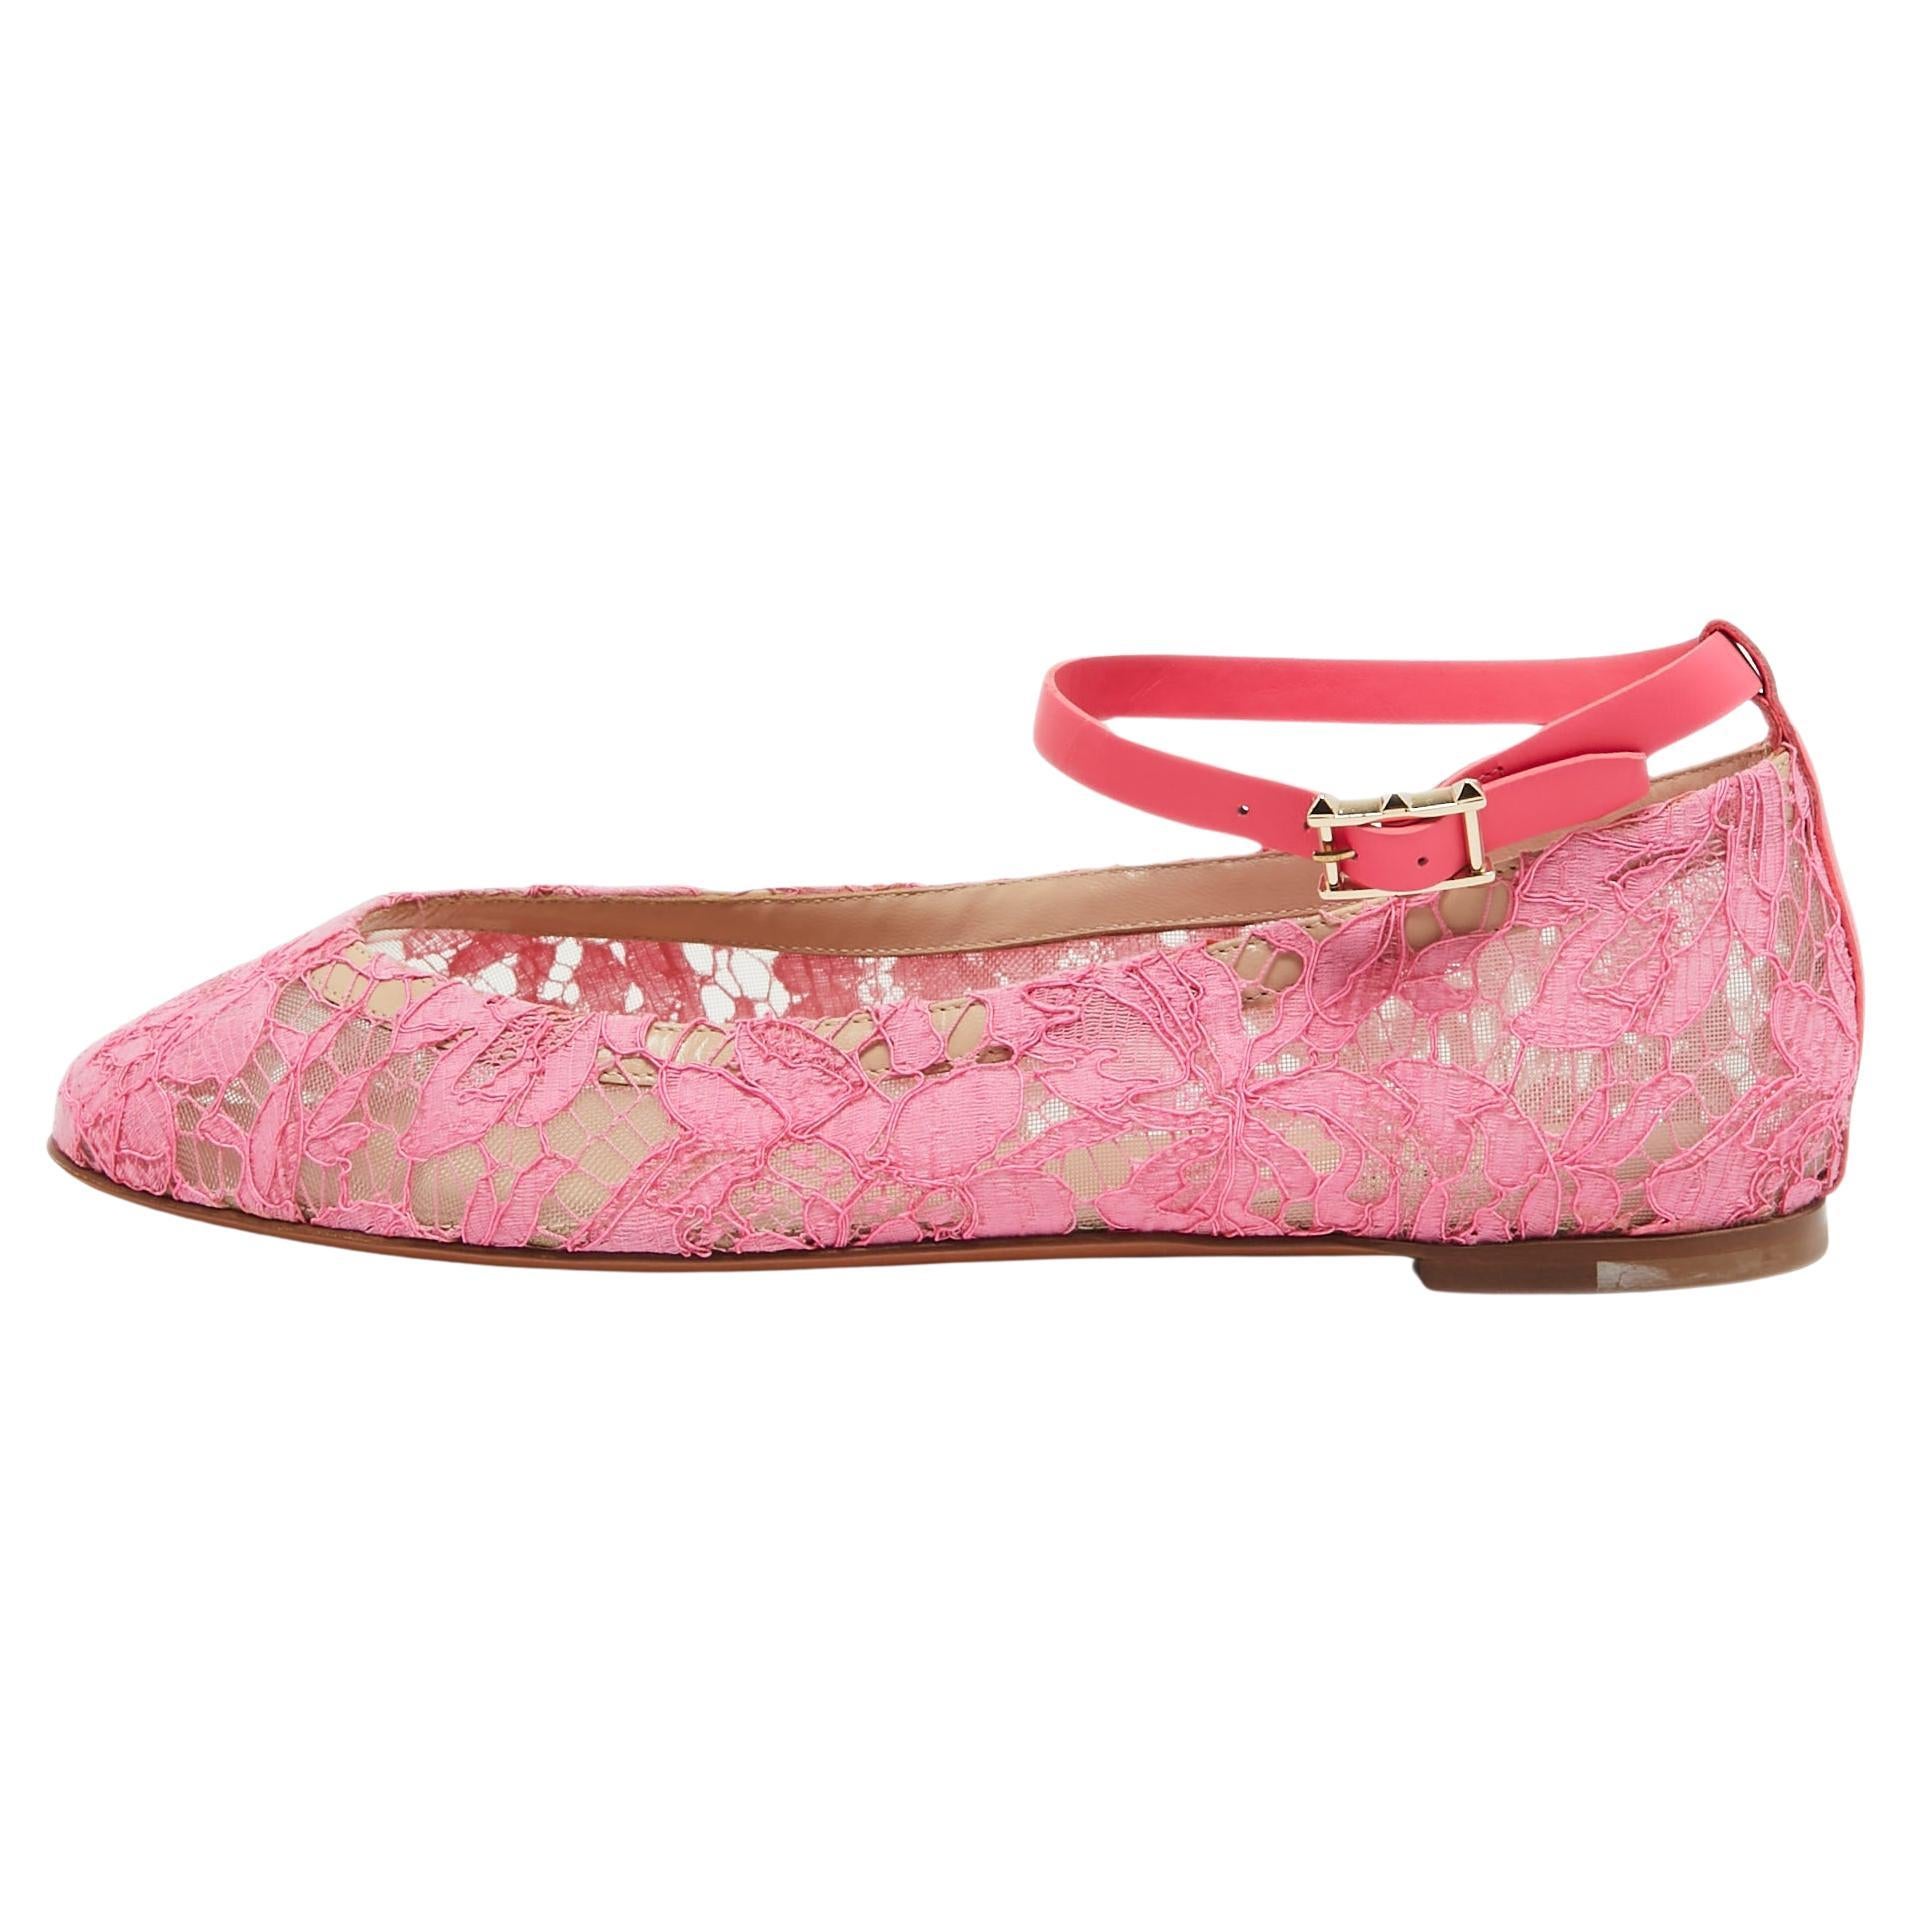 Valentino Pink Lace and Leather Ankle Wrap Ballet Flats Size 40